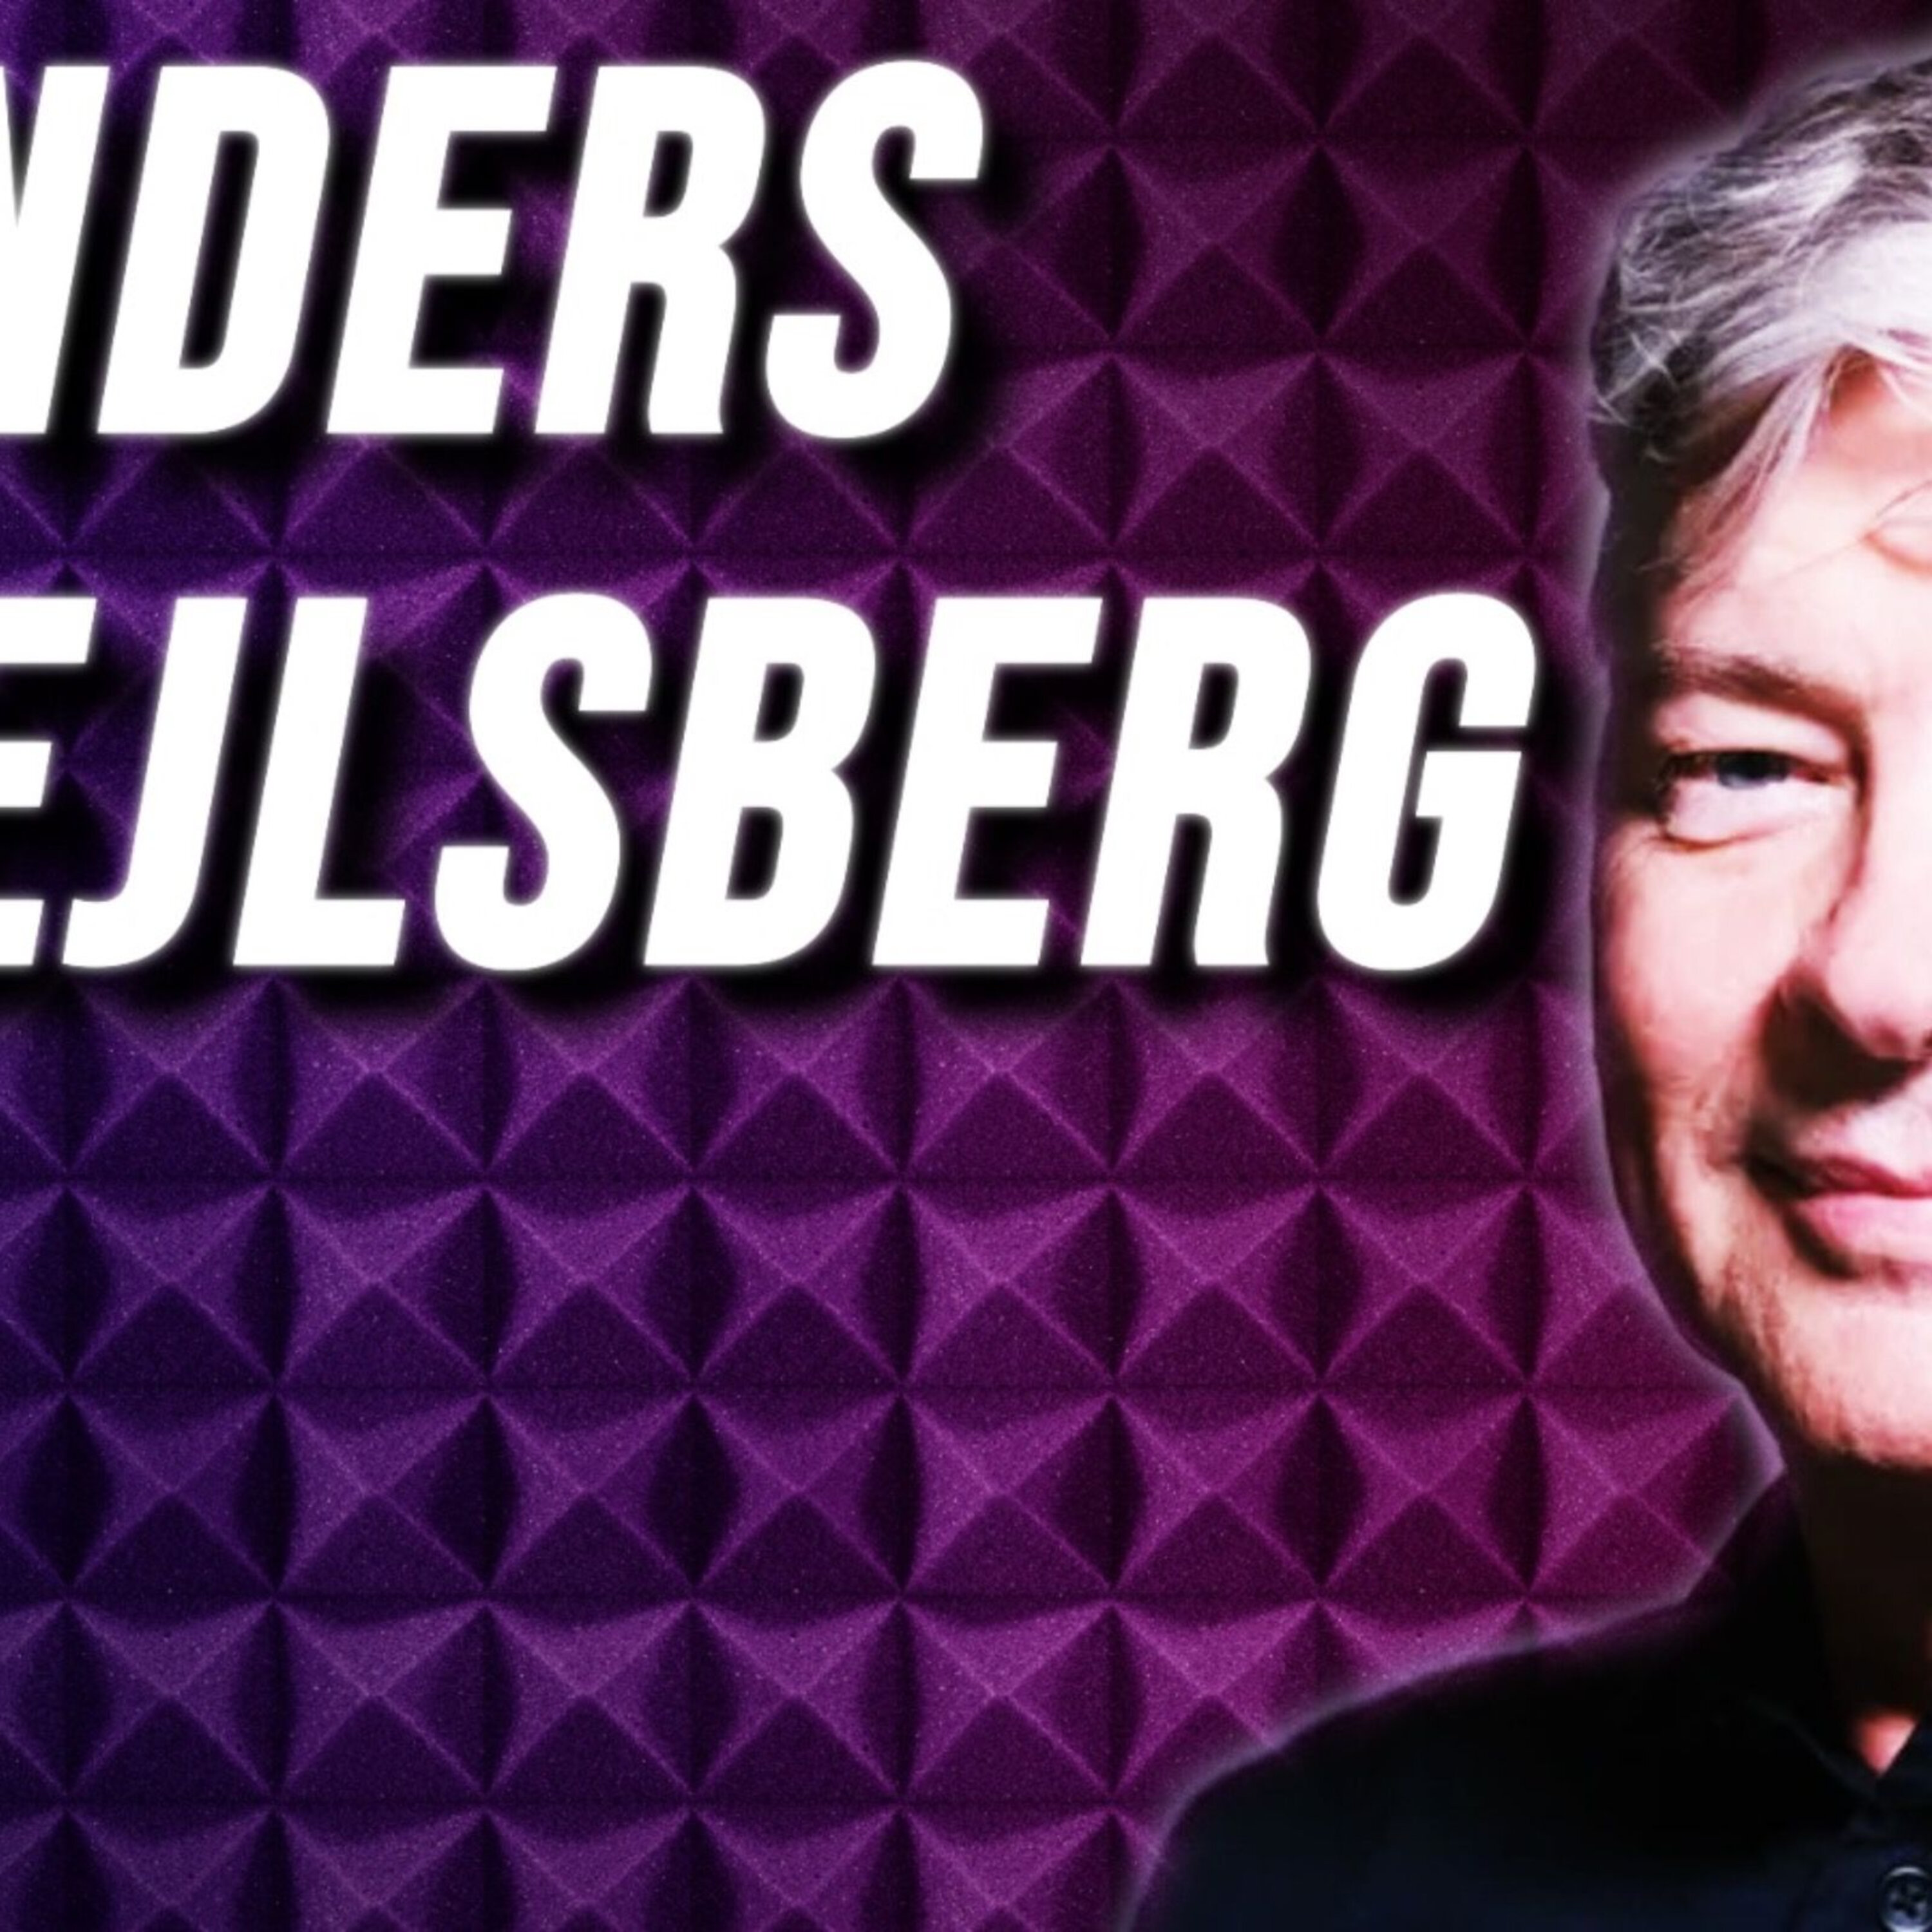 EP 34 - Anders Hejlsberg, Microsoft Technical Fellow and creator of Typescript, C#, Turbo Pascal and Delphi on programming languages, and the power of working on long term projects